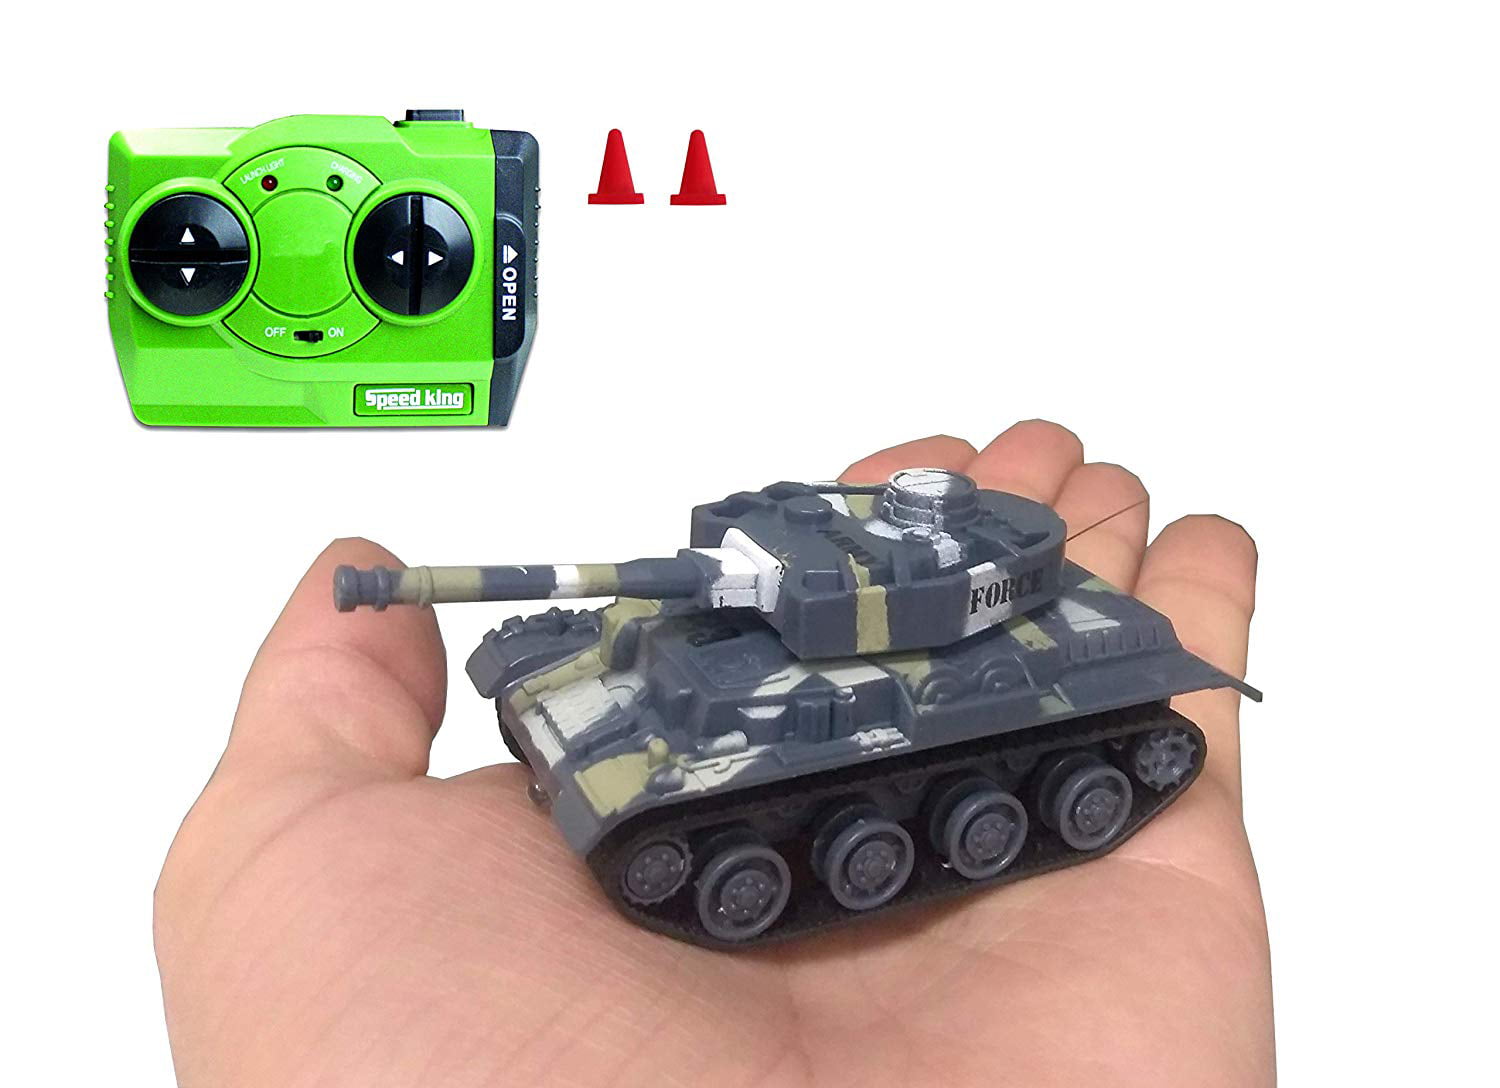 Details about   Simulation RC Tank Toy Luminous Tank Toy Music Player Mini For Children Gift 